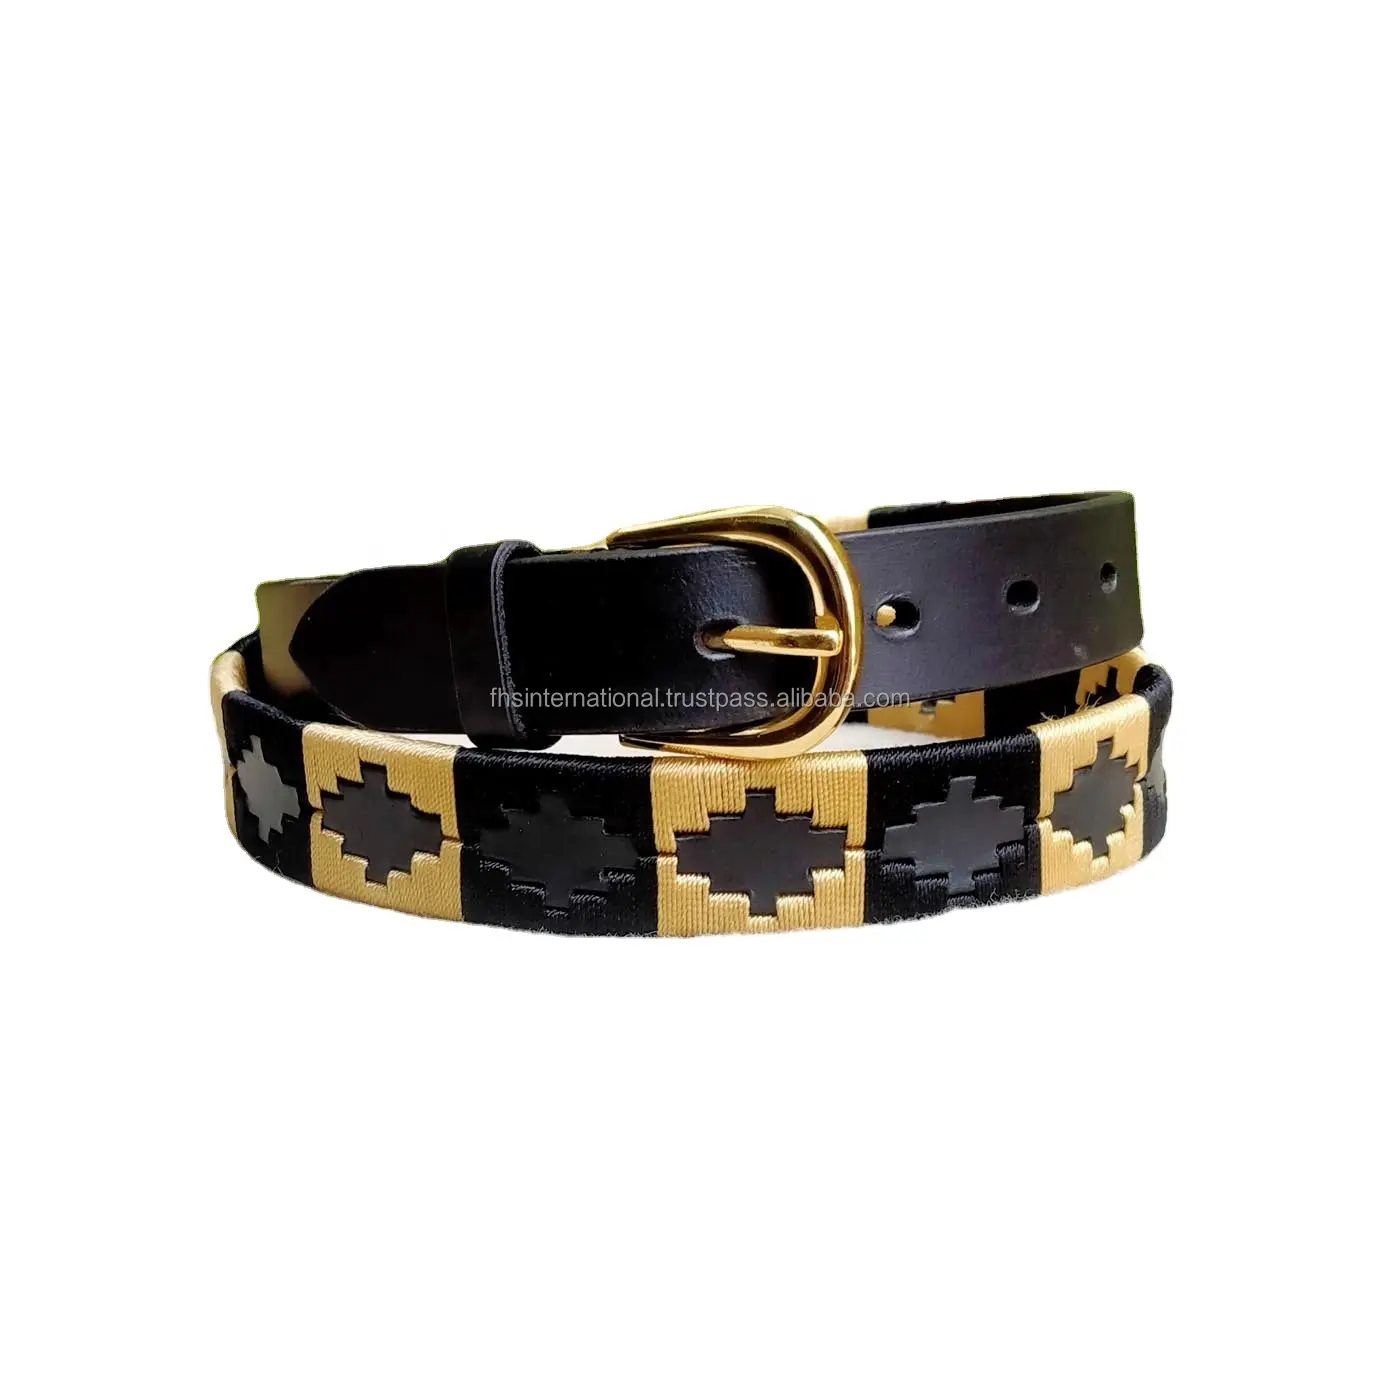 Trendy - Black - Gold - Leather Polo Belt - Zinc Alloy - Gold Buckle - Hand Stitched